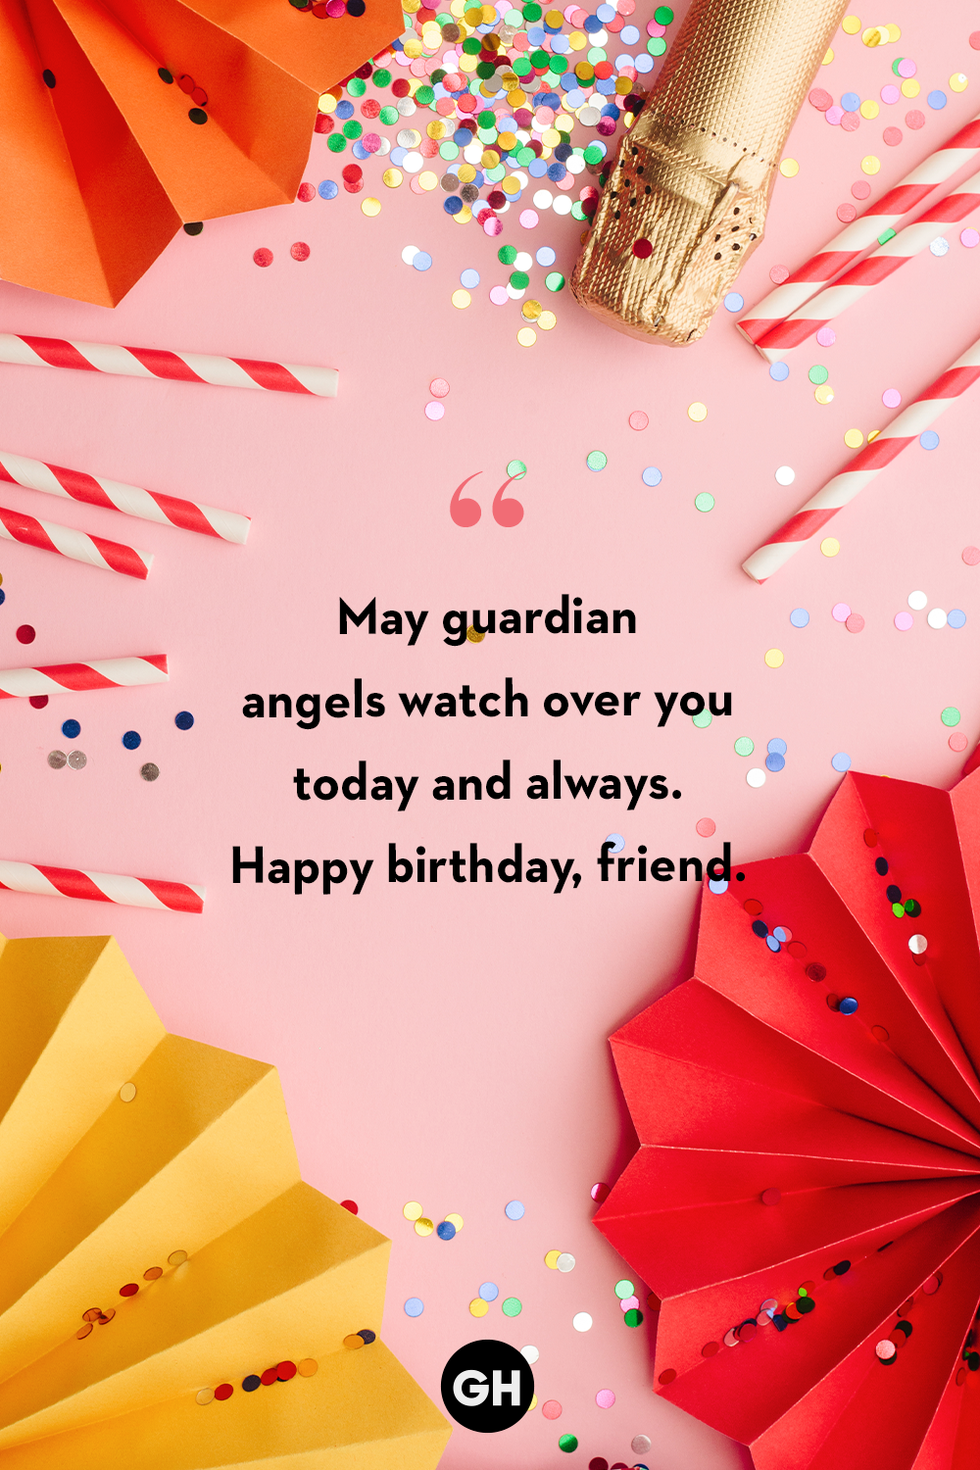 may guardian angels watch over you today and always happy birthday, friend